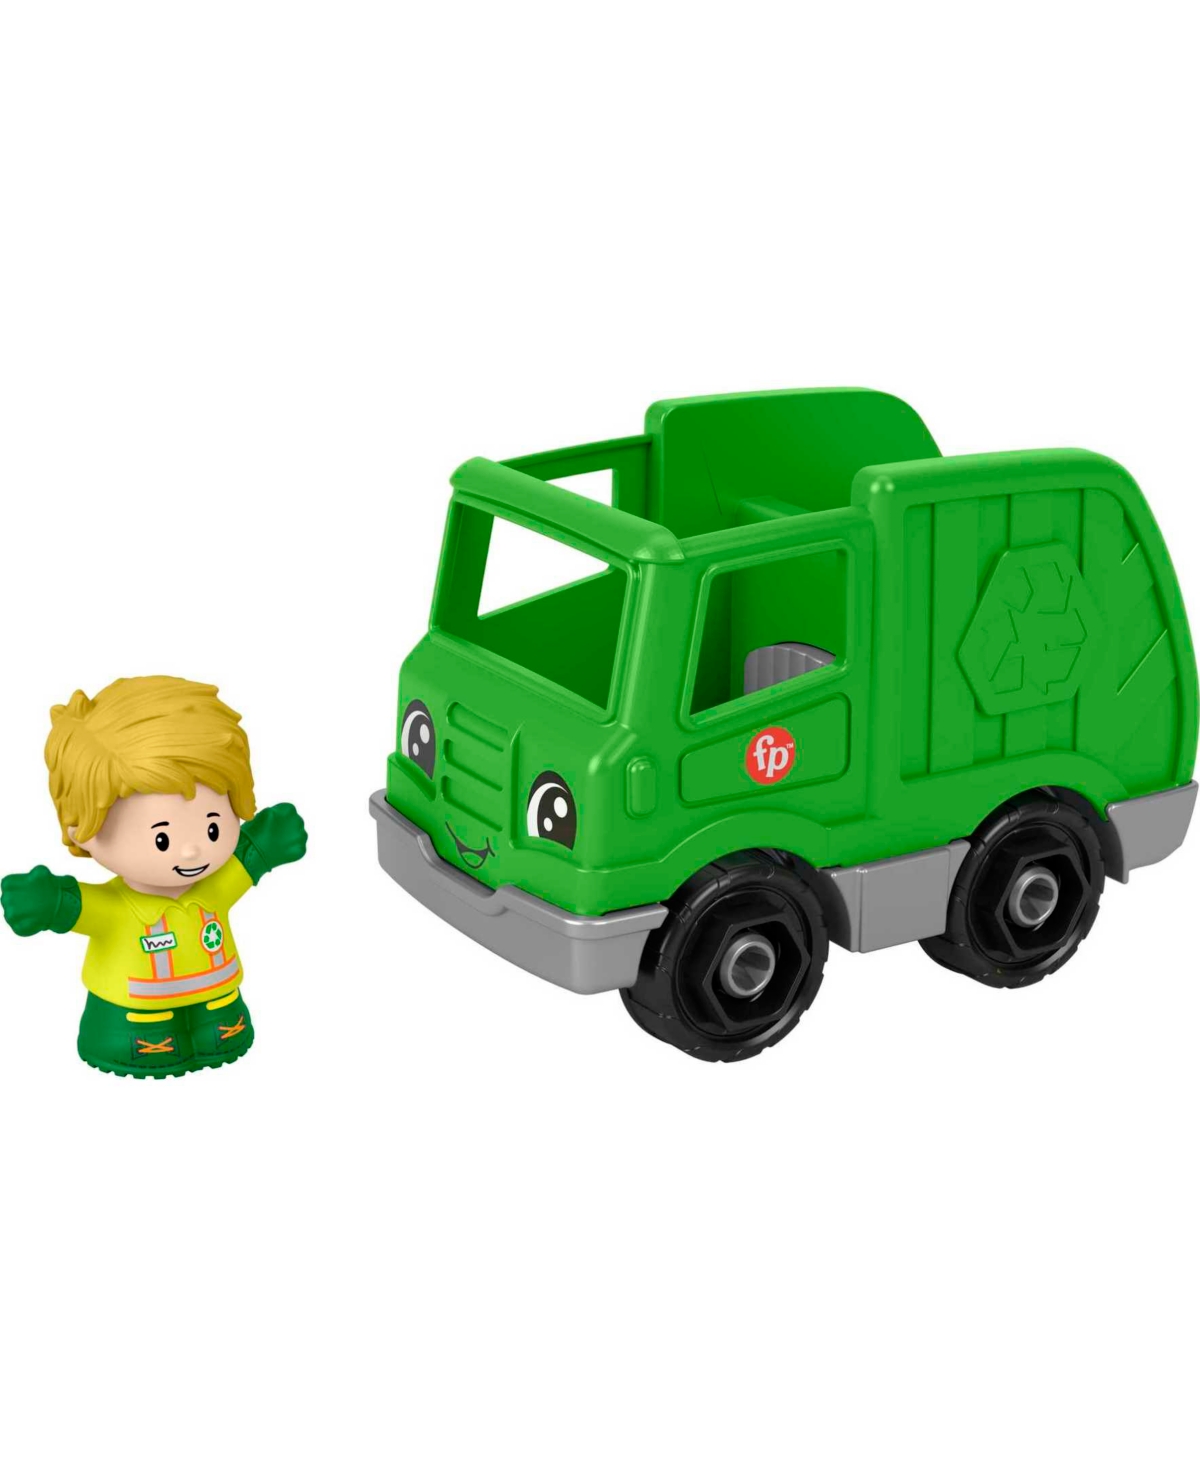 Fisher Price Kids' Little People Recycle Truck And Character Figure Set For Toddlers, 2 Pieces In Multi-color